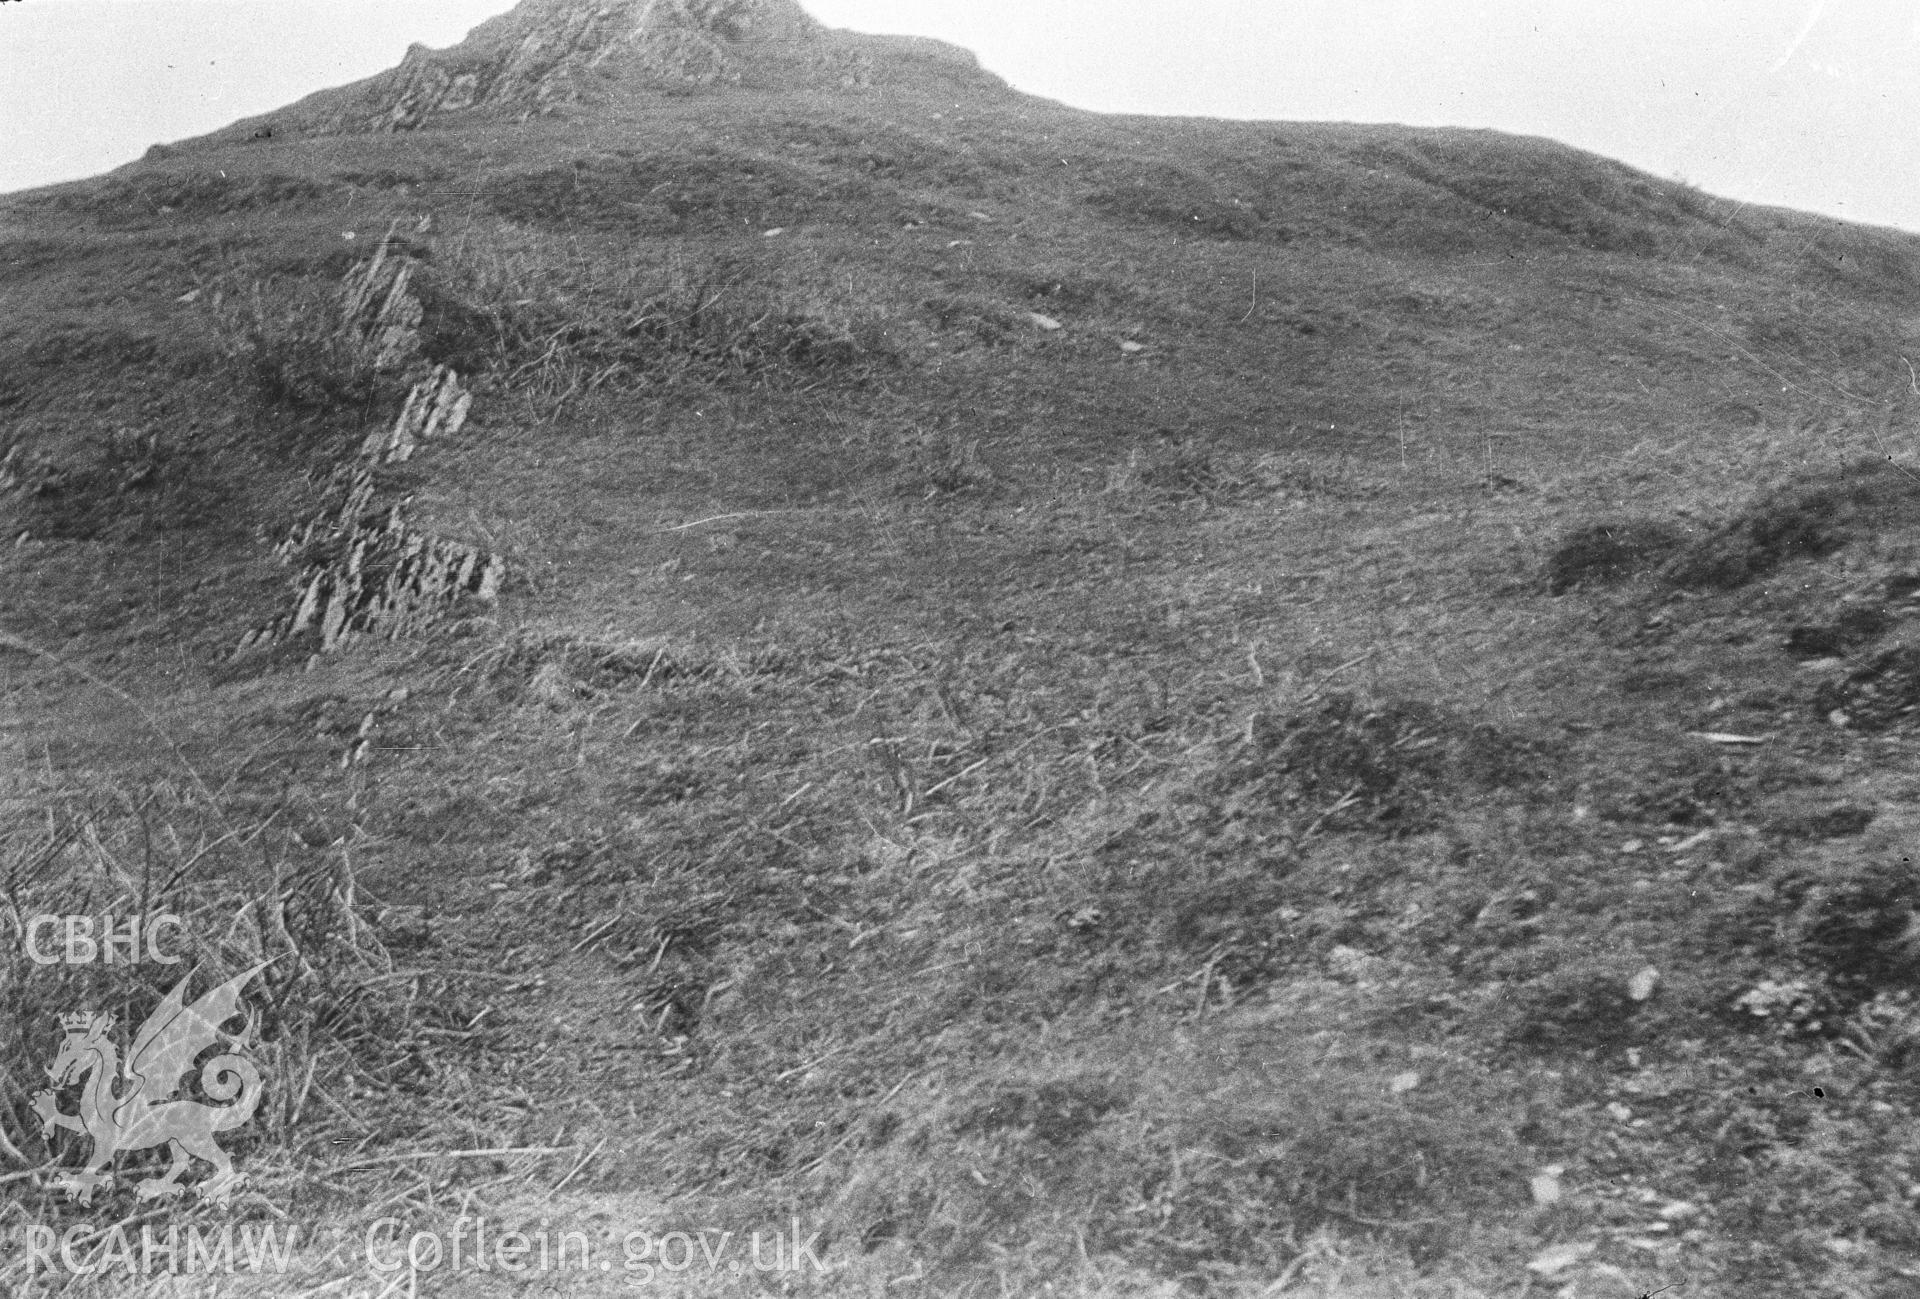 Digital copy of a nitrate negative showing view of Castell Grogwynion.